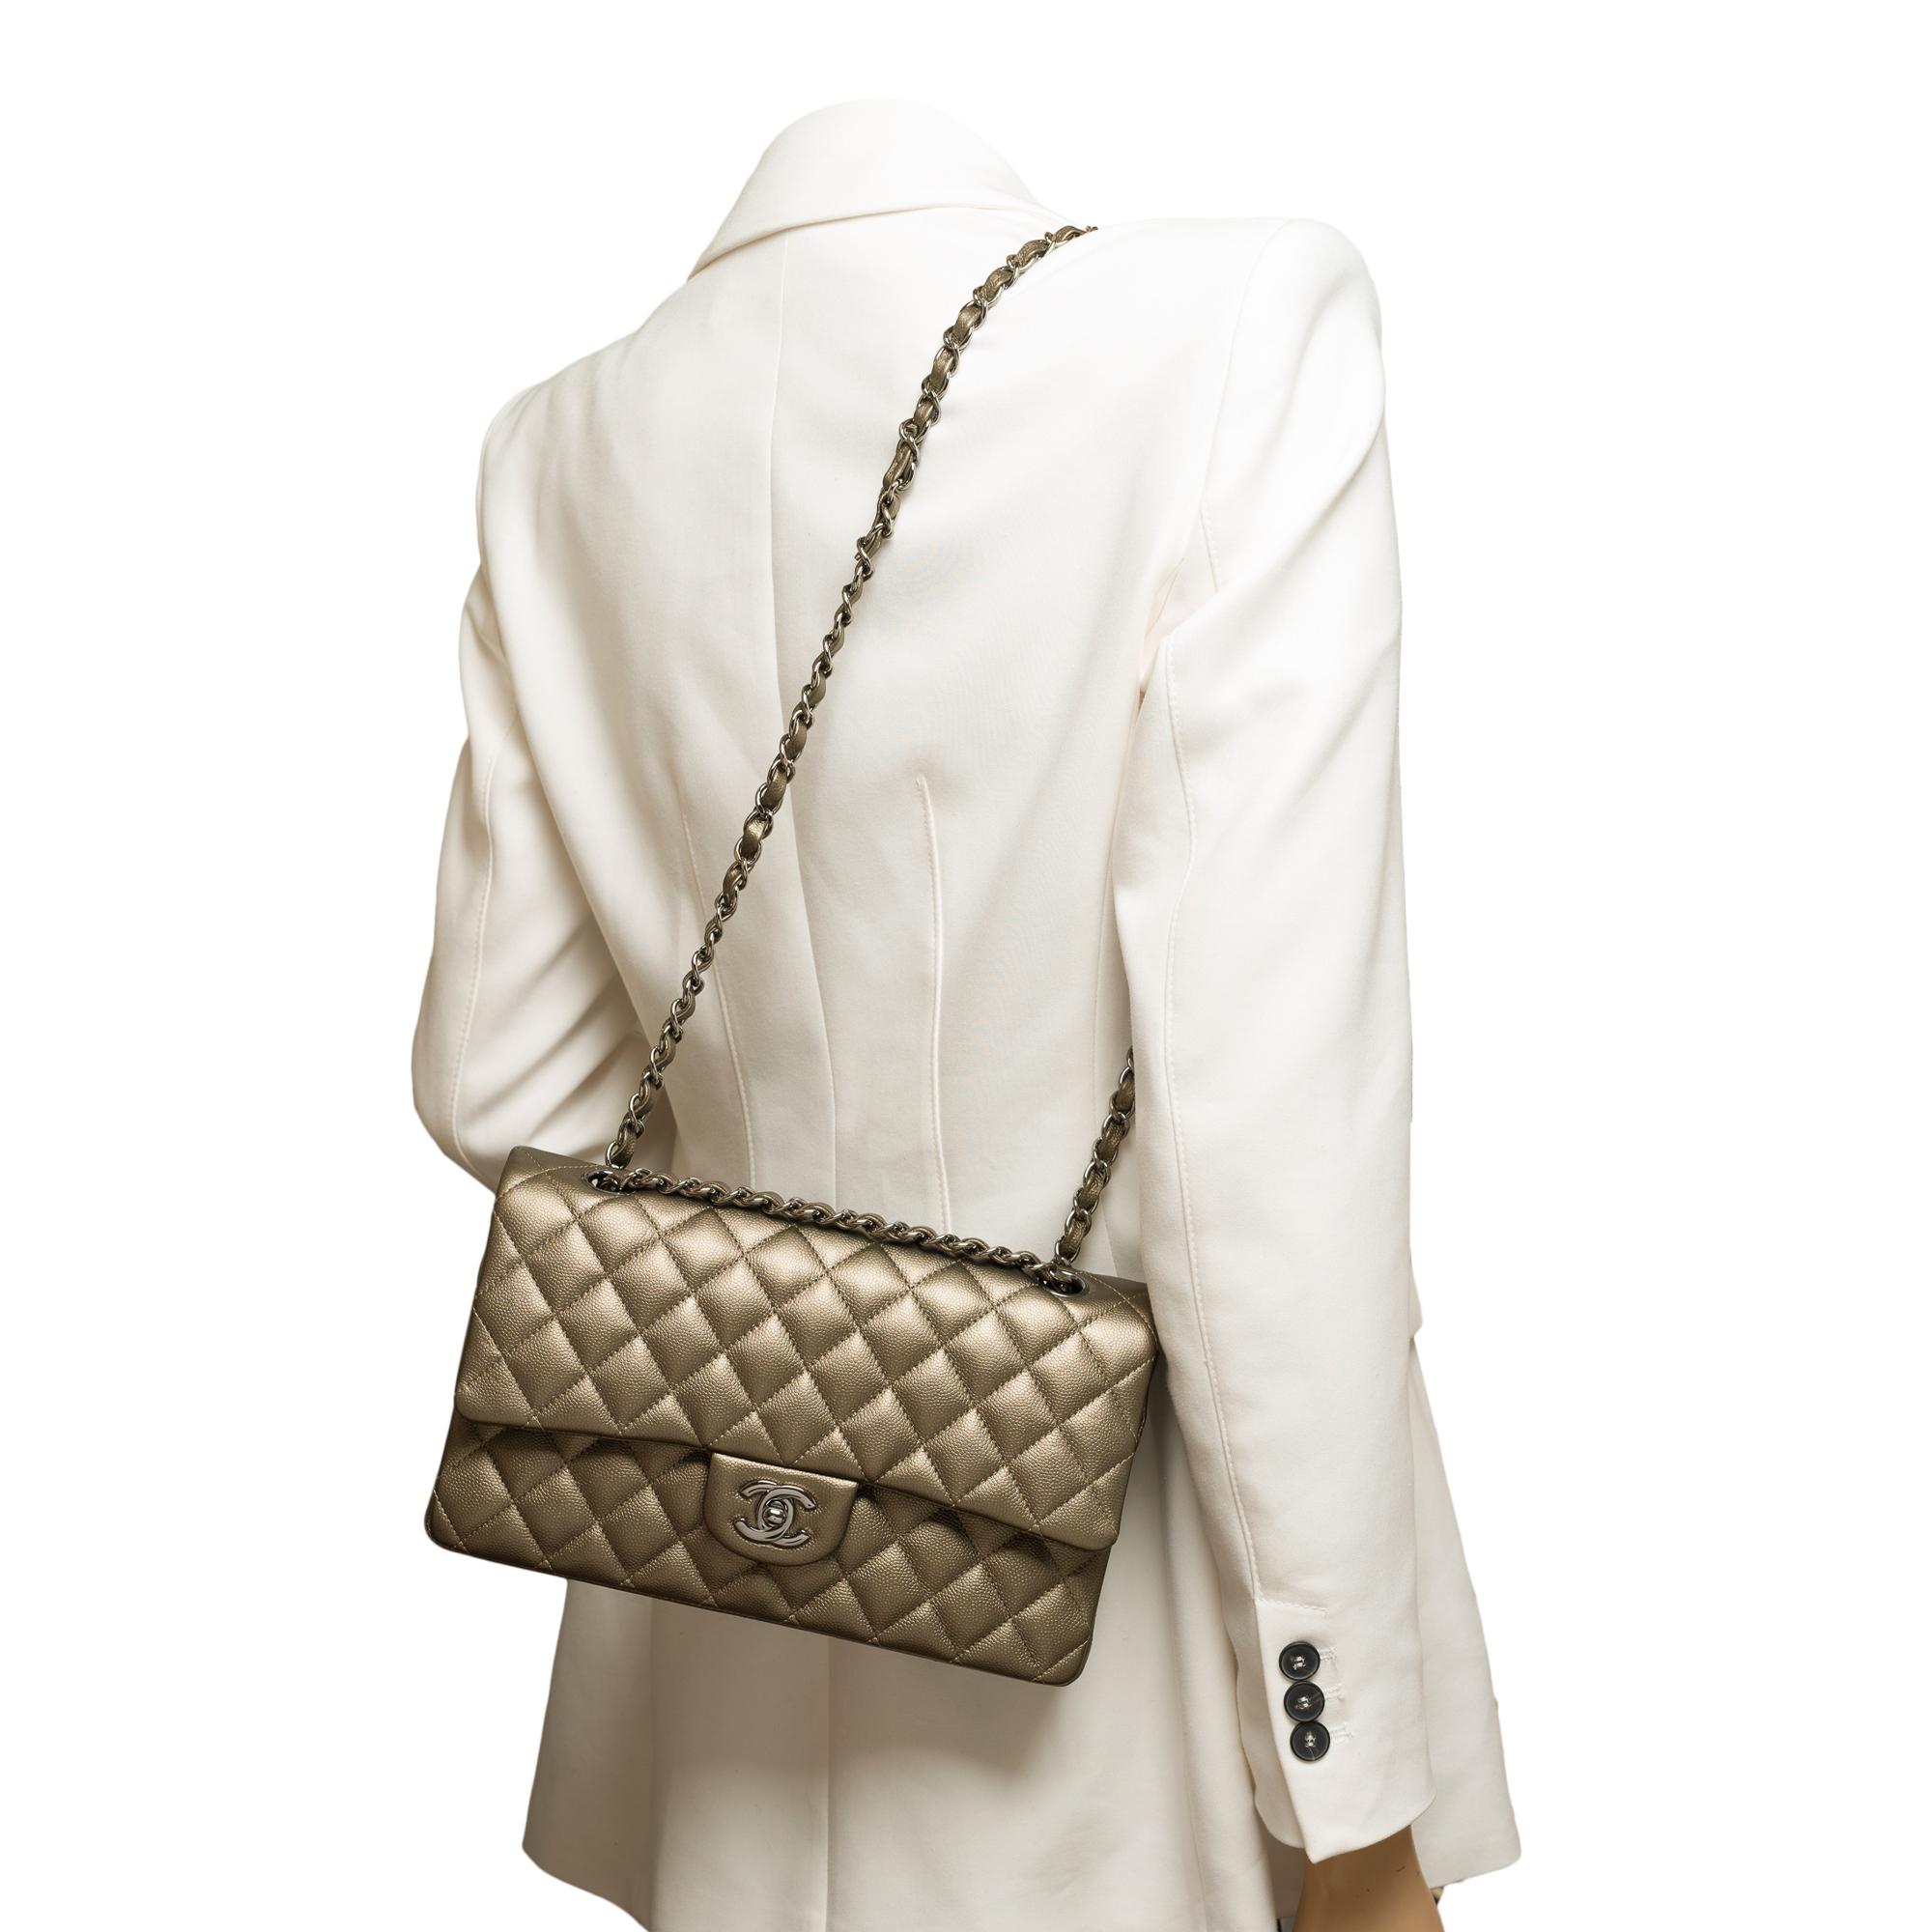 Chanel Timeless double flap shoulder bag in Bronze caviar quilted leather, SHW 9